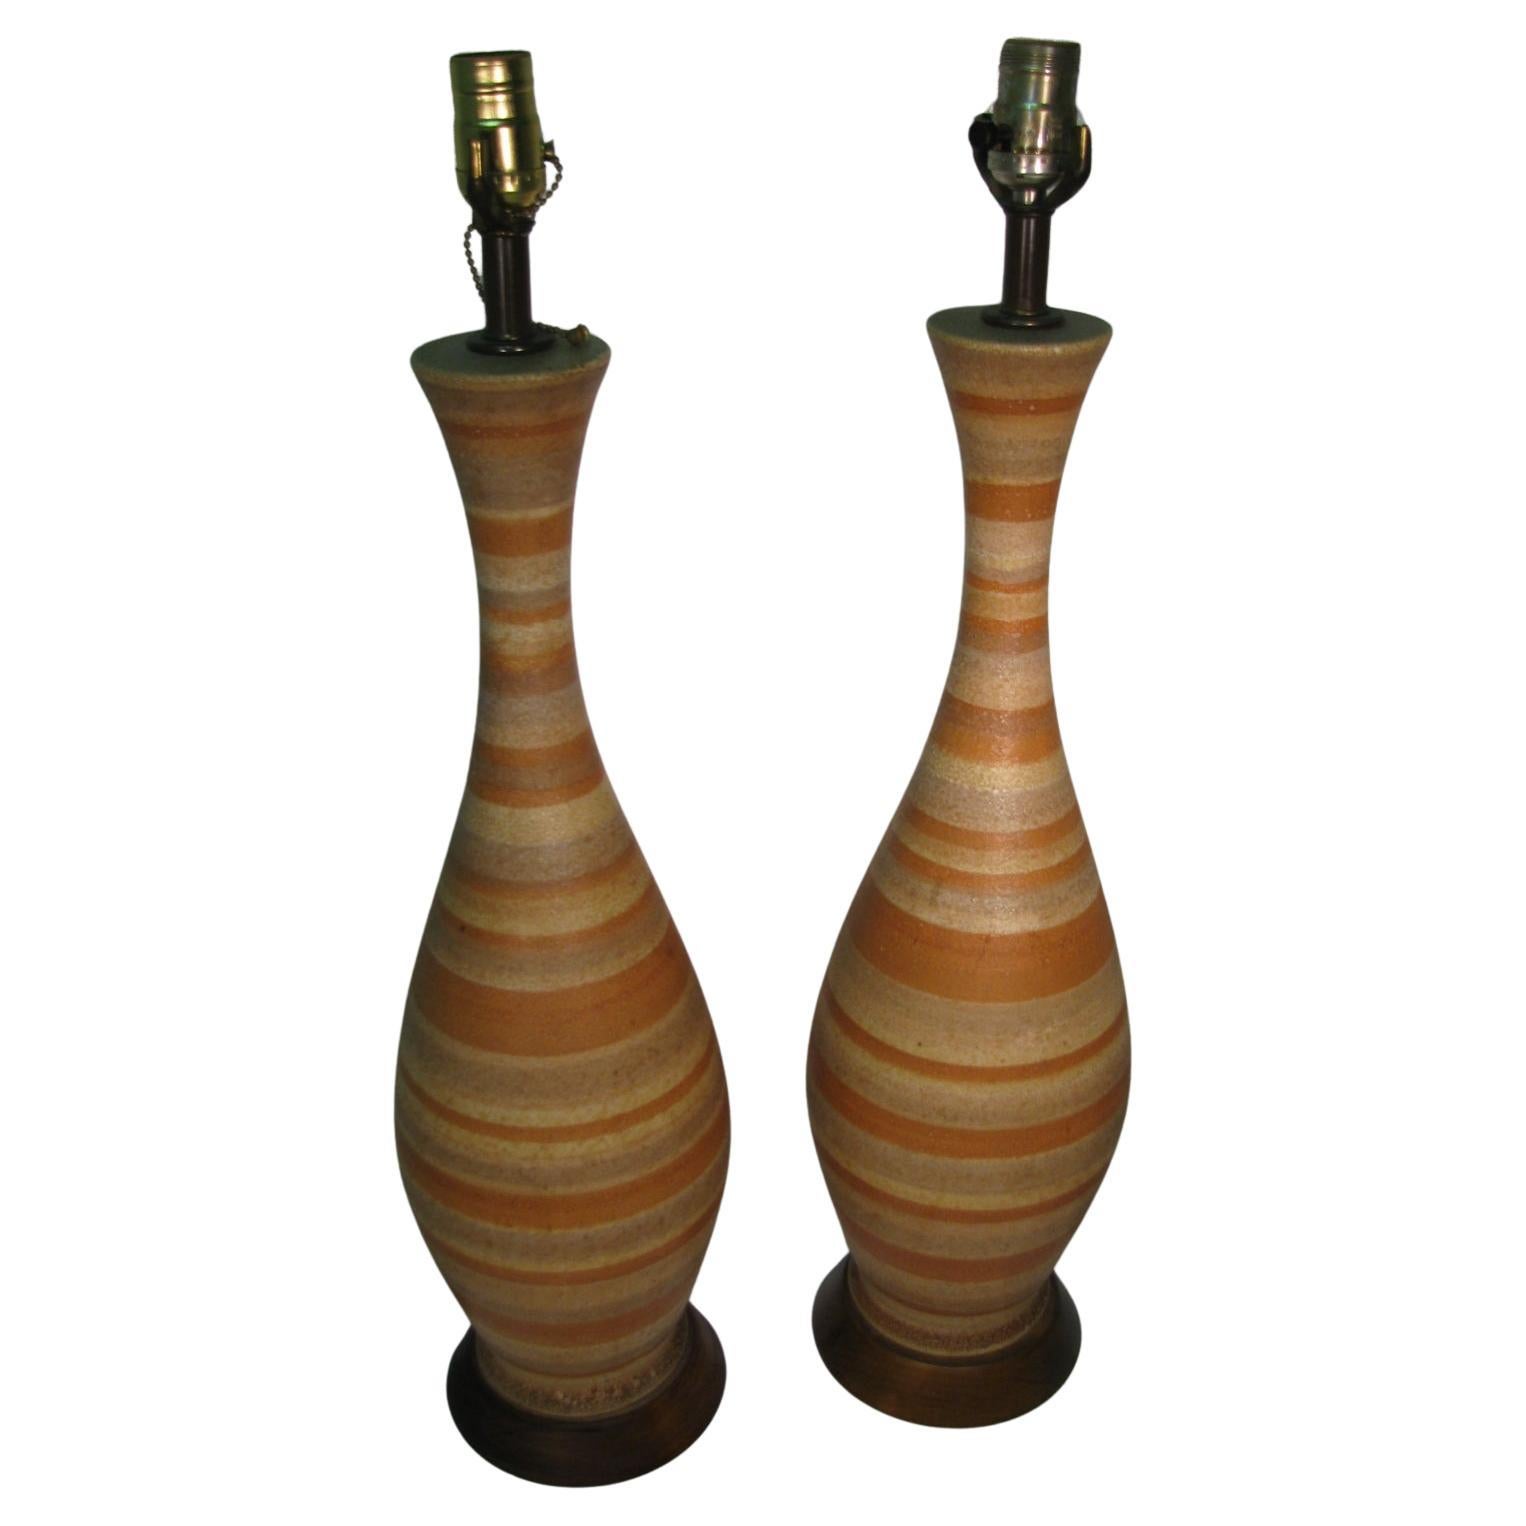 Pair of Mid-Century Modern  Bitossi Striped Pottery Table Lamps Italy